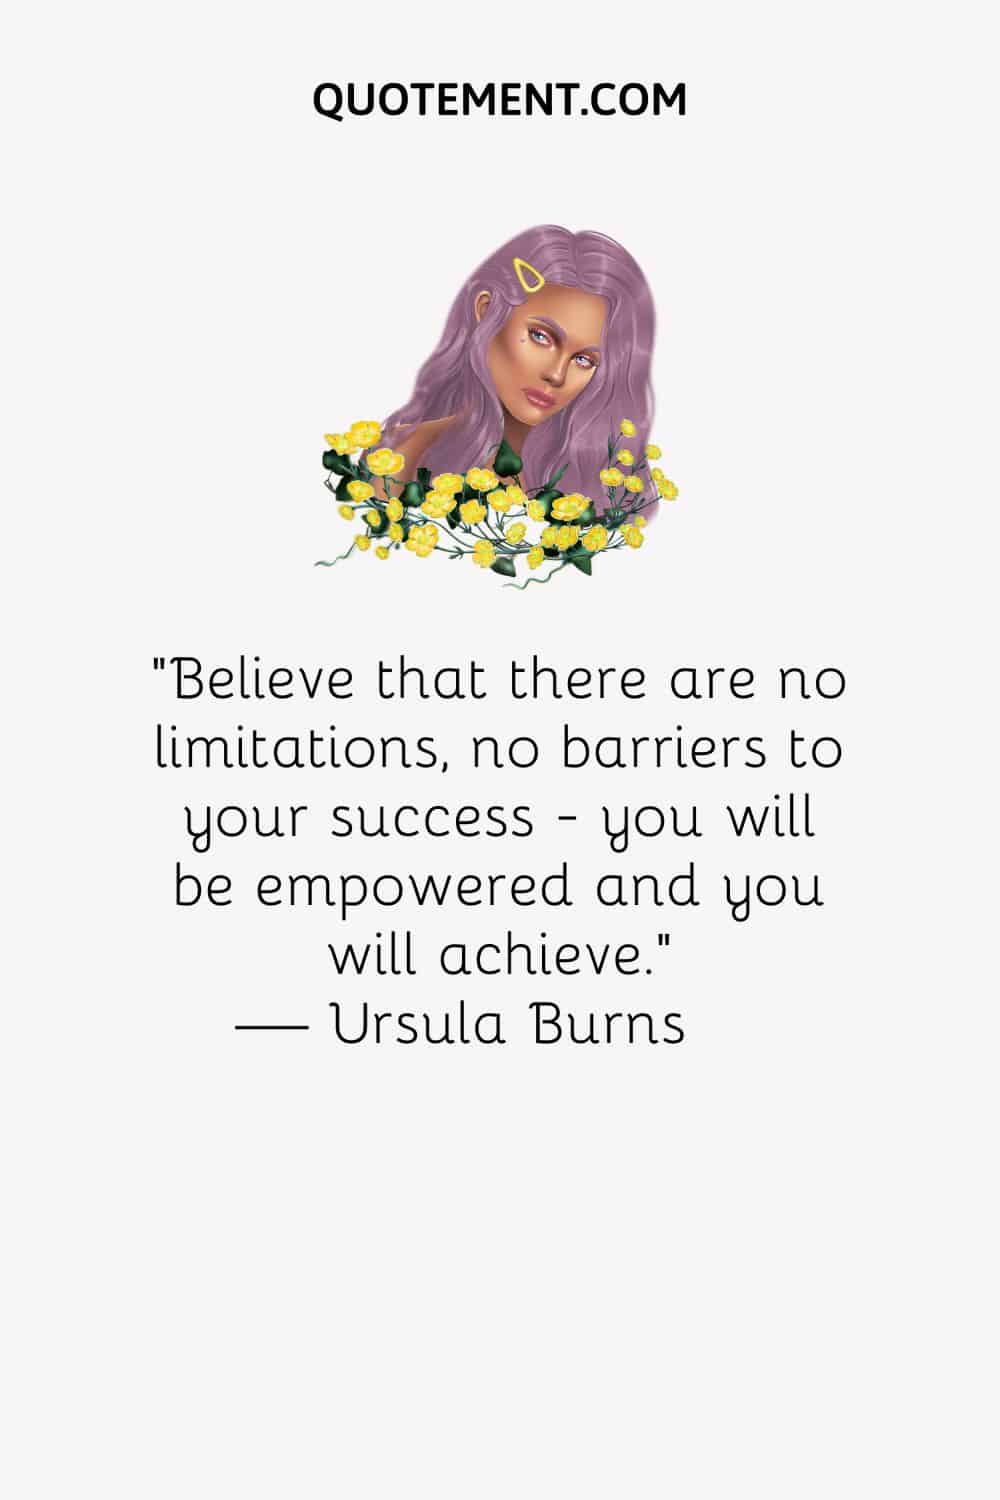 Believe that there are no limitations, no barriers to your success - you will be empowered and you will achieve.